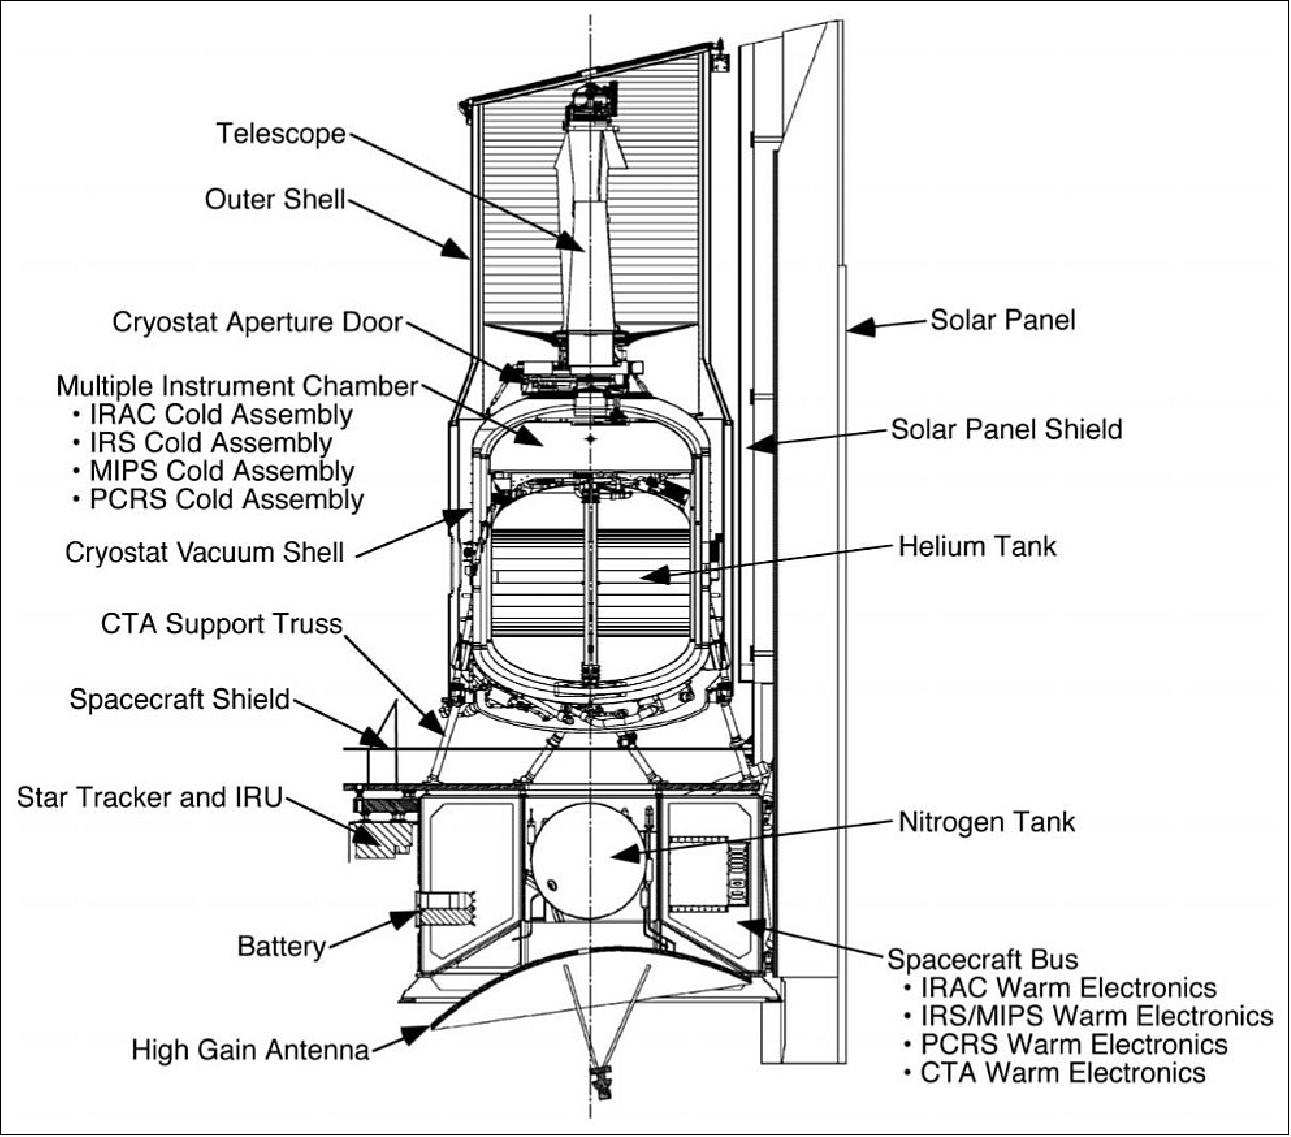 Figure 1: Cutaway view of the Spitzer flight hardware. The observatory is approximately 4.5 m high and 2.1 m in diameter. In this figure the dust cover is shown prior to its ejection approximately 5 days after launch (image credit: Spitzer Team)